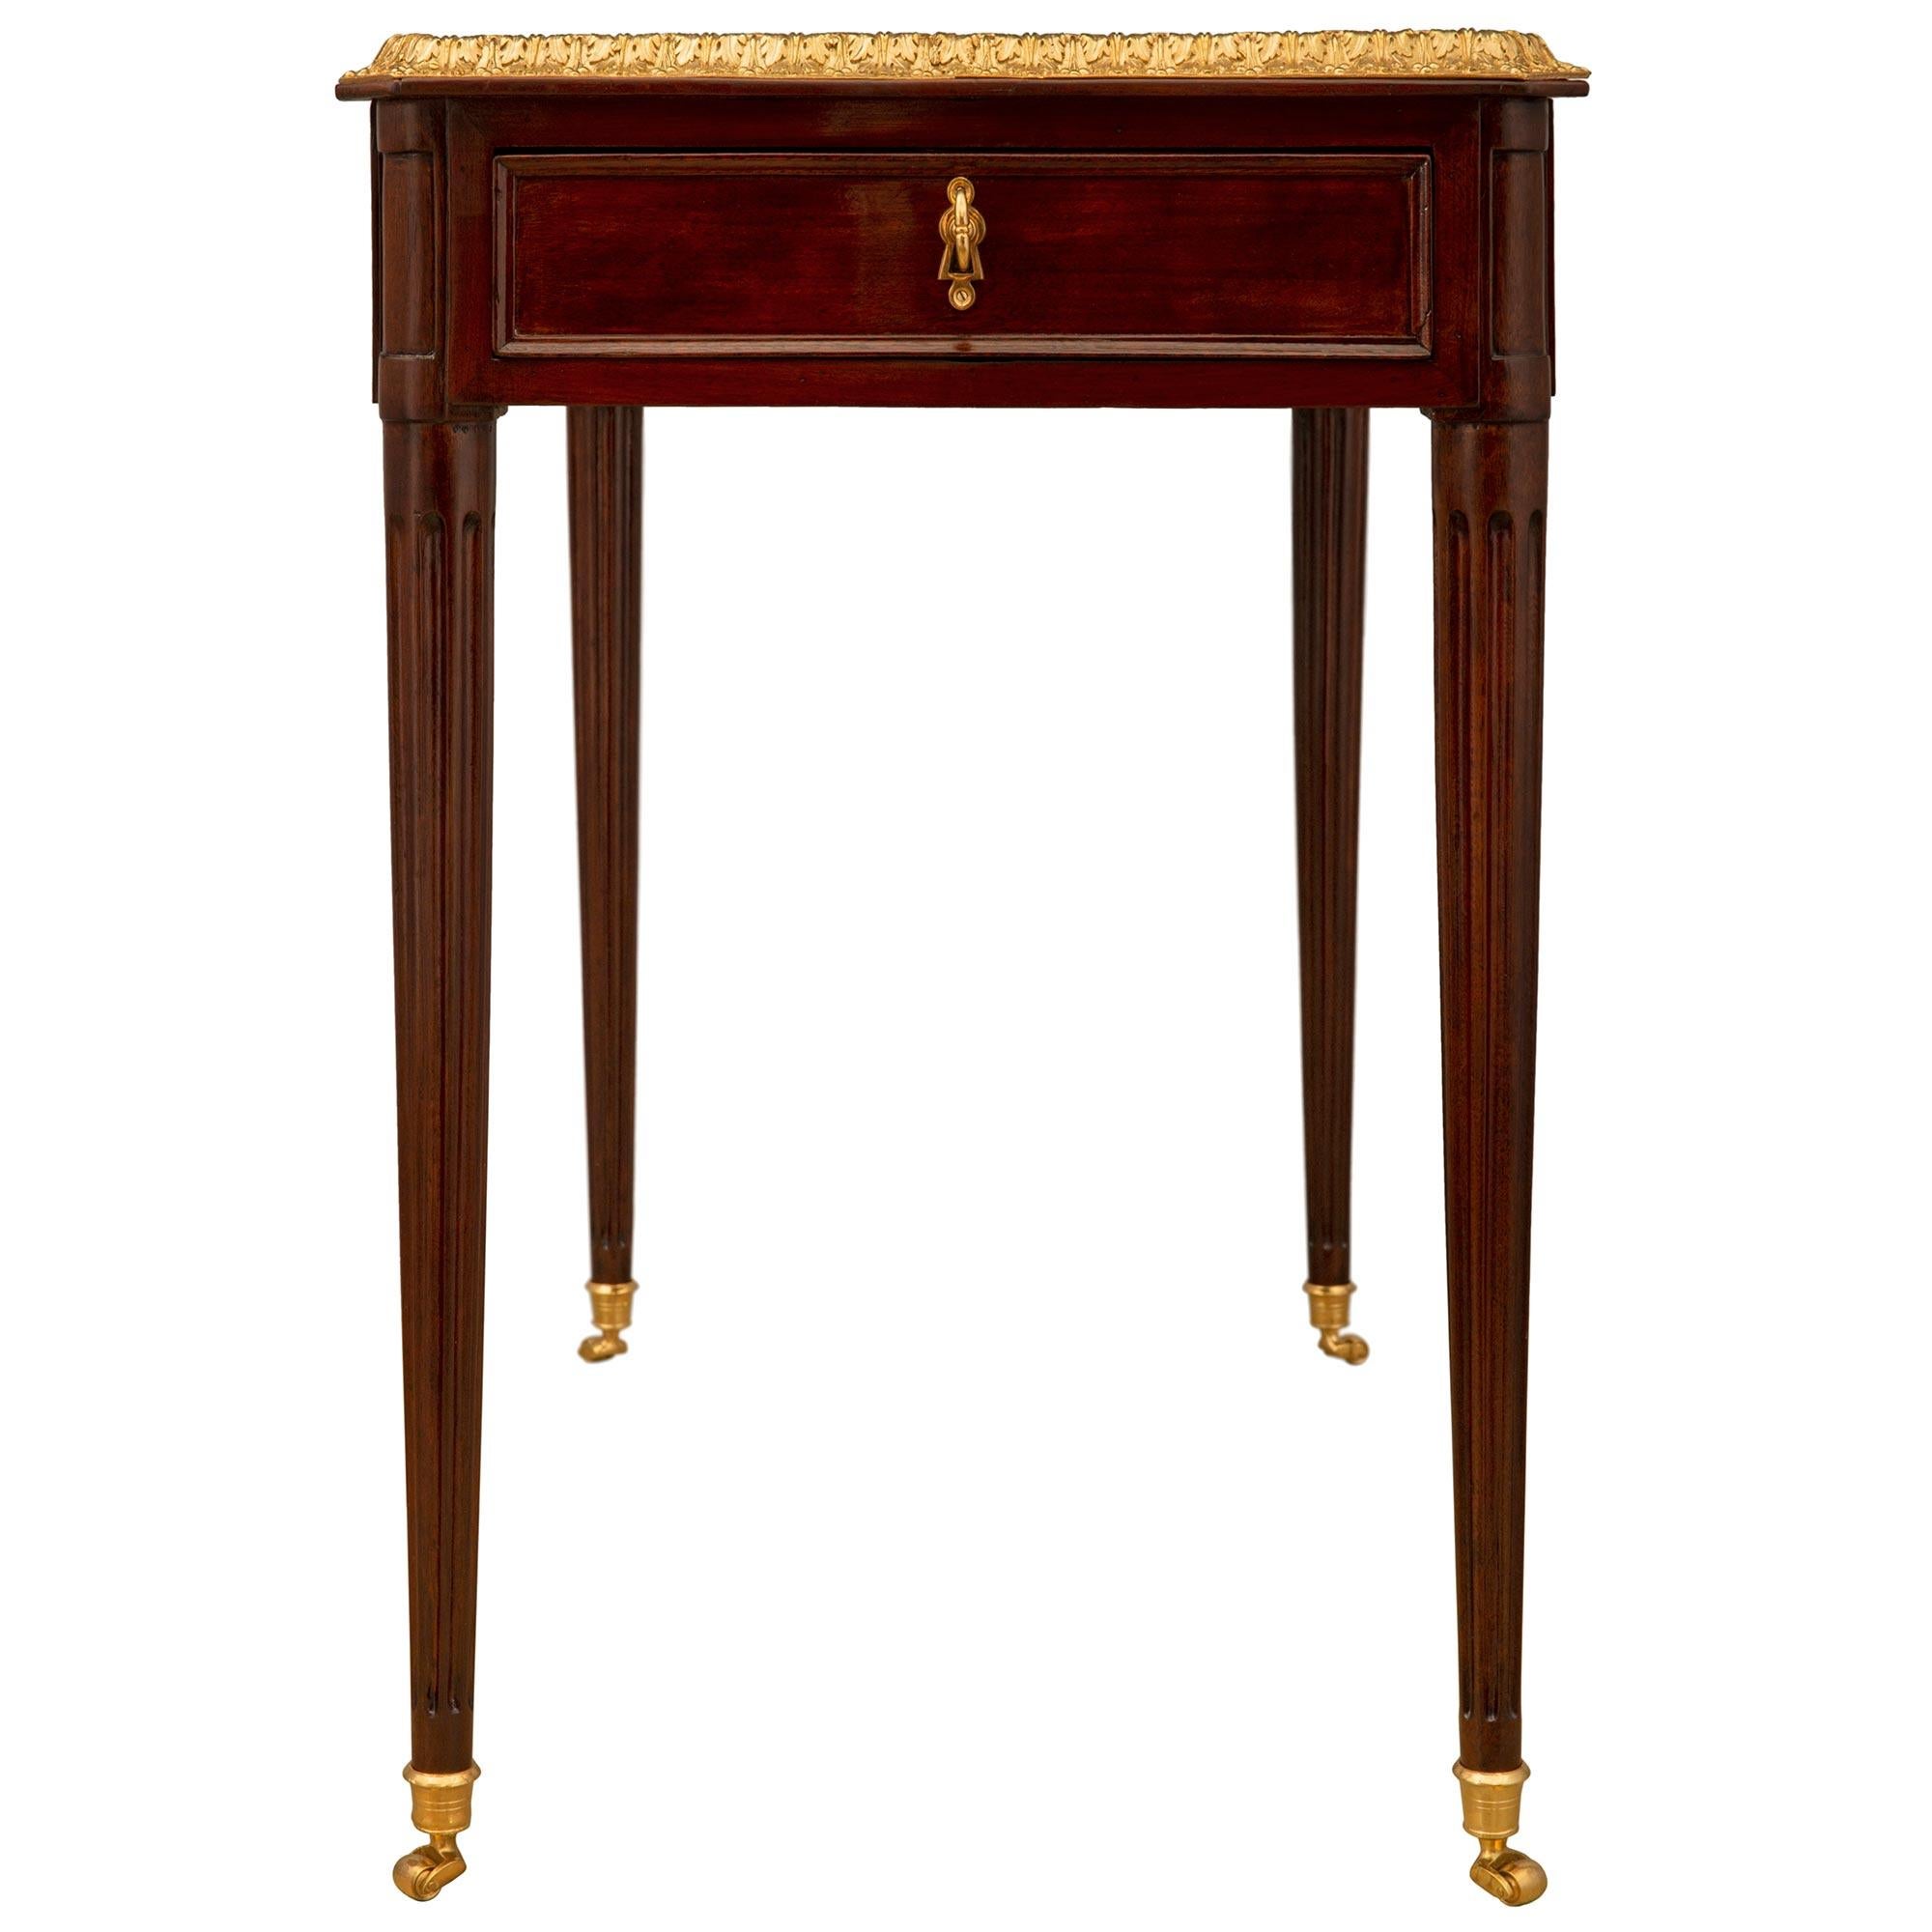 French 18th Century Louis XVI Period Mahogany and Ormolu Side Table / Desk For Sale 1